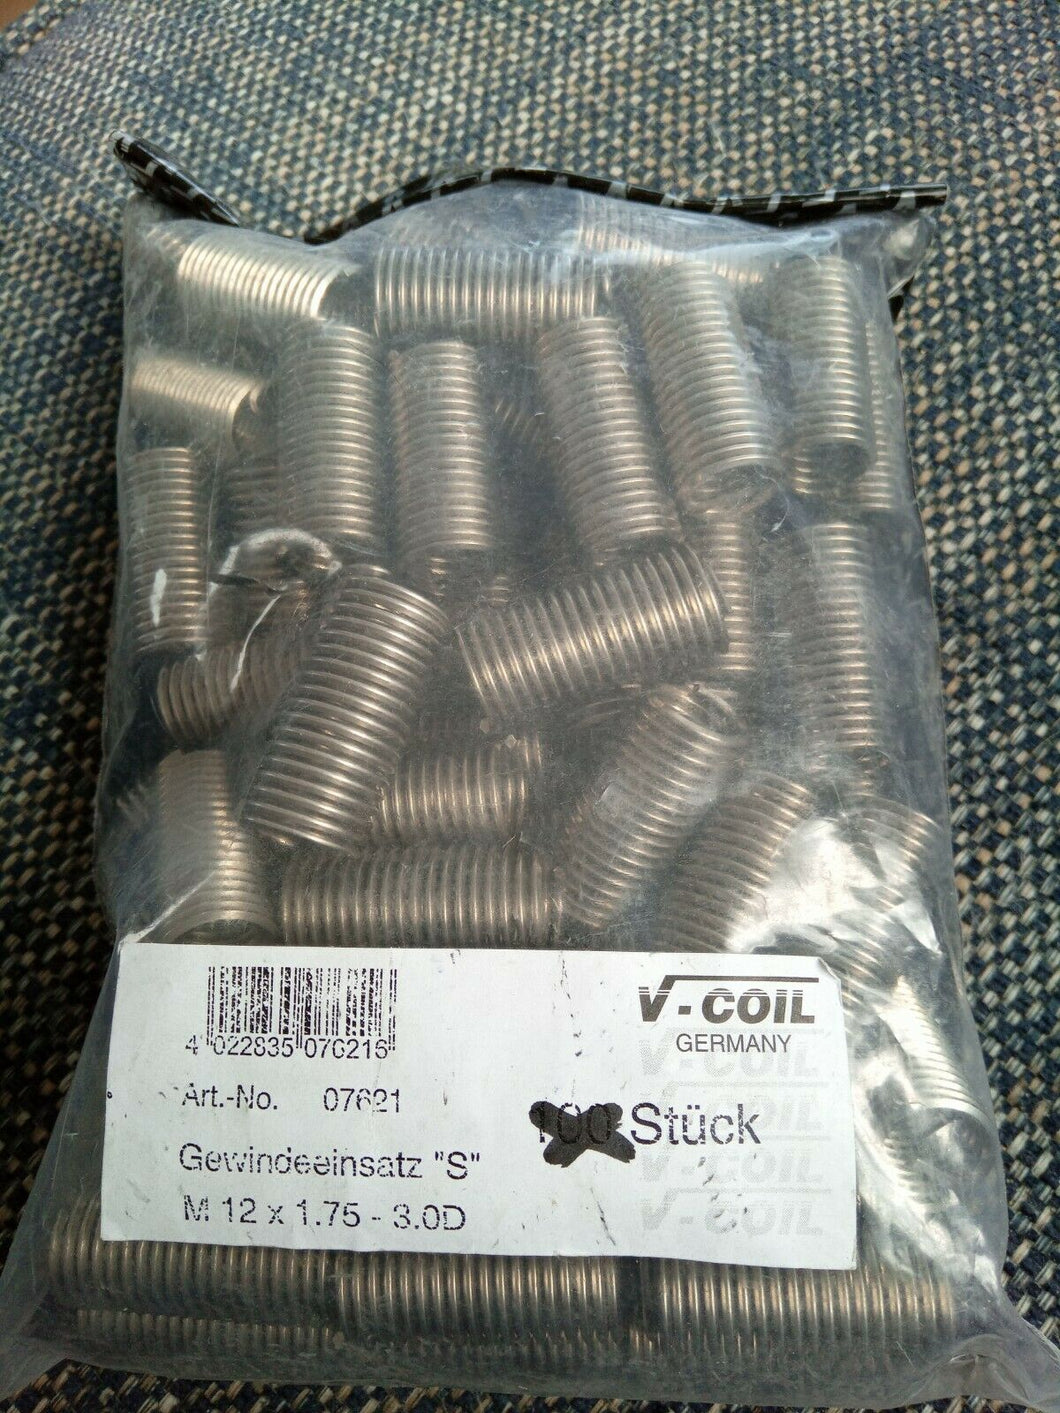 V-Coil Insert M12 x 1.75 X  3D  Compatable with Helicoil.singles. German